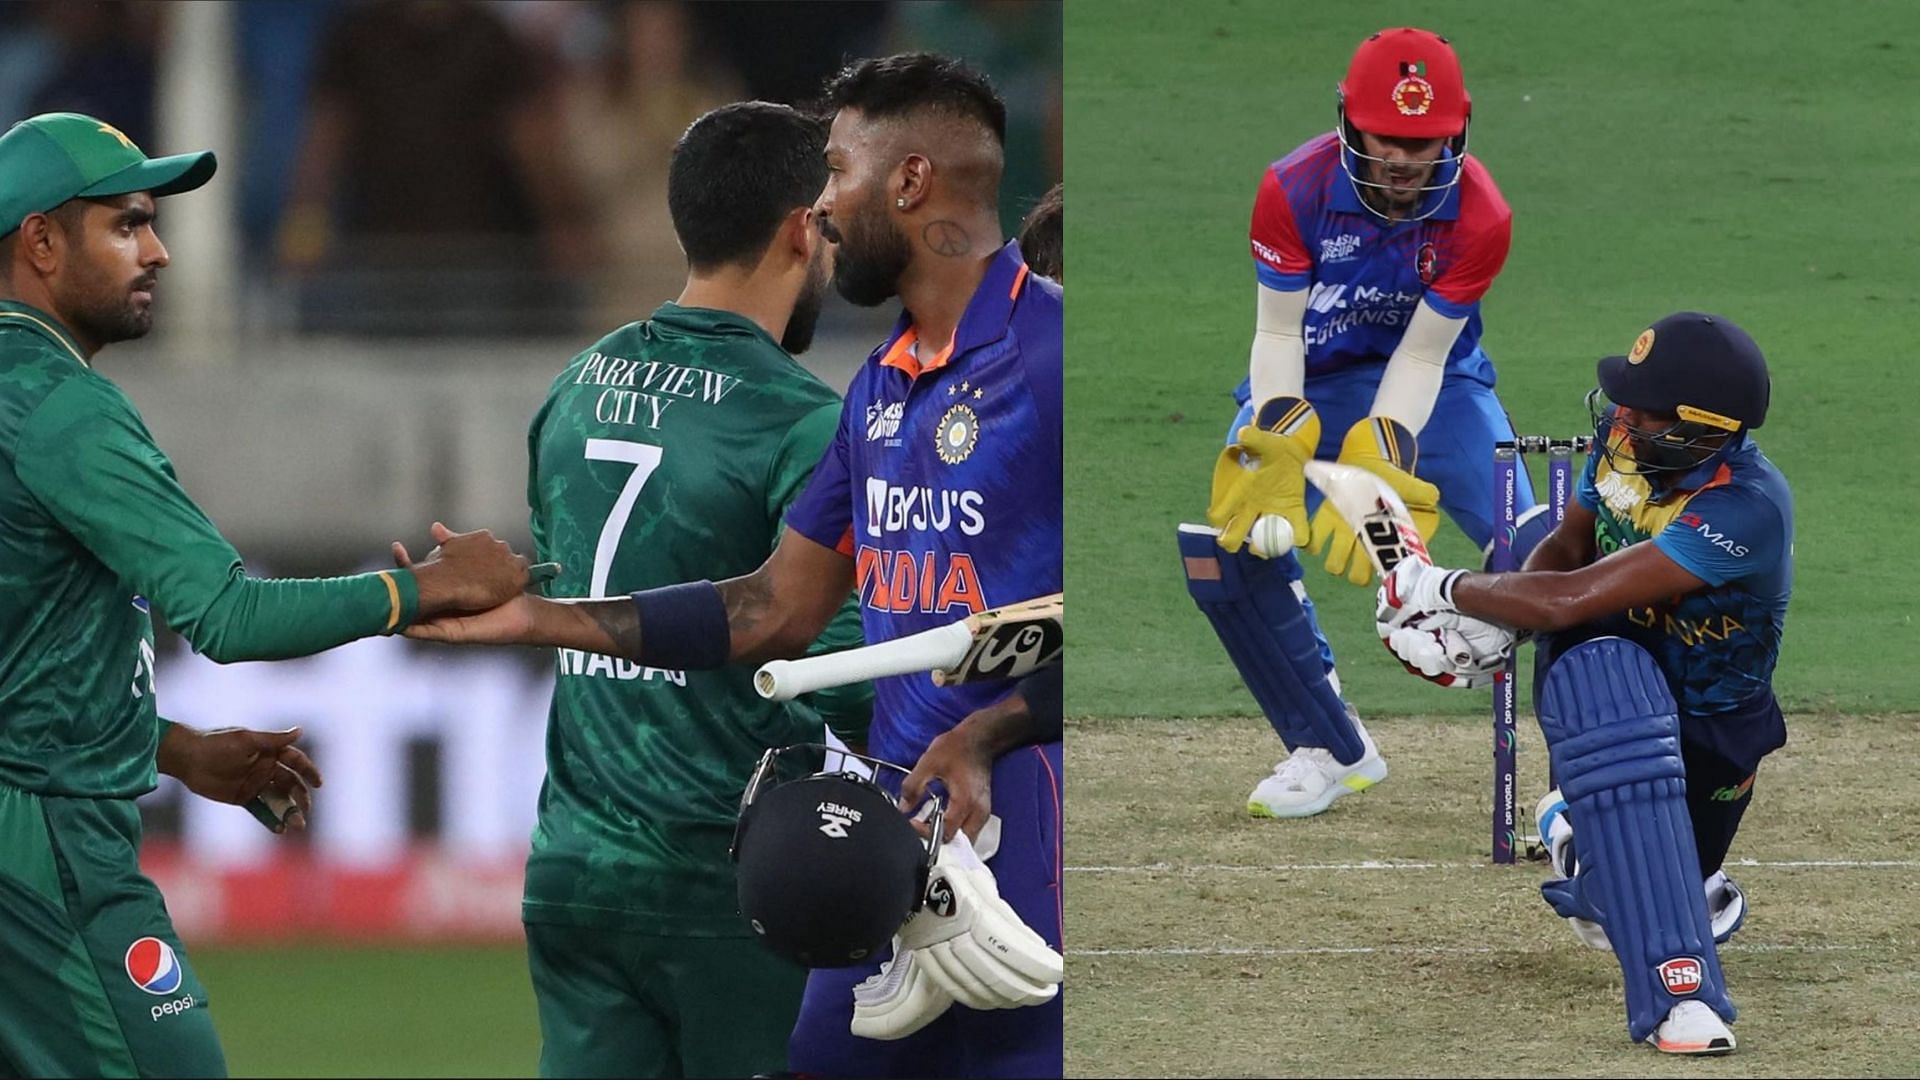 Four teams have qualified for the second round of Asia Cup 2022 (Image: Instagram)